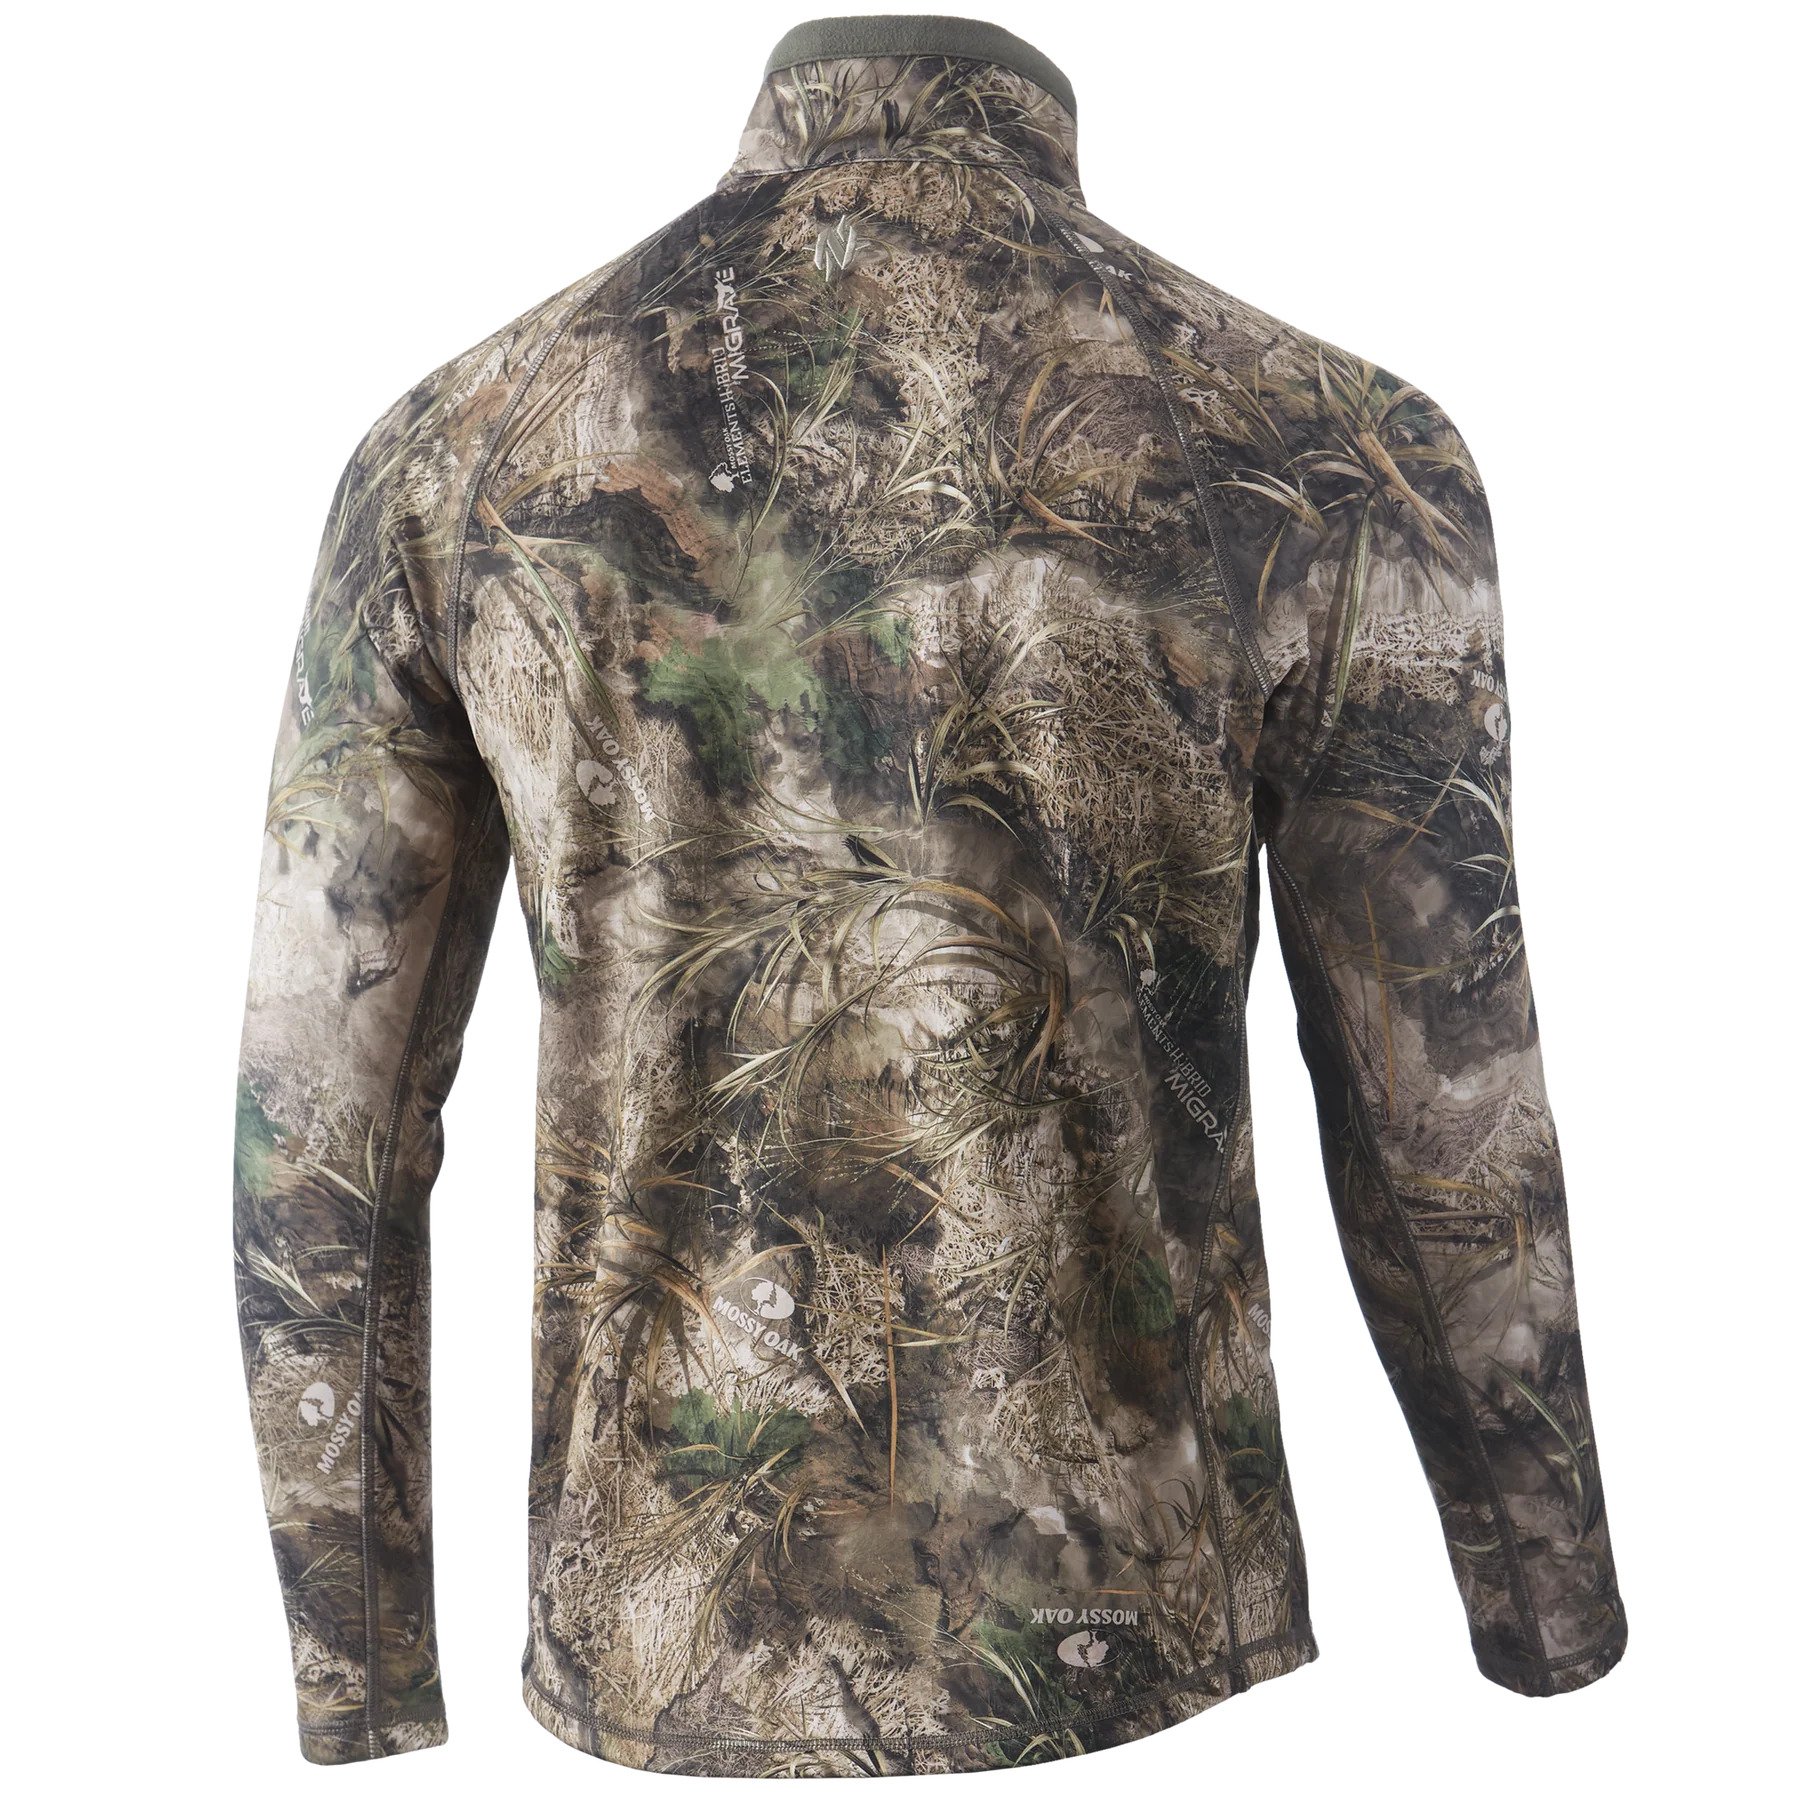 Nomad Utility Camo Pullover Jacket 1/2 Zip - Mossy Oak Migrate - Large ...